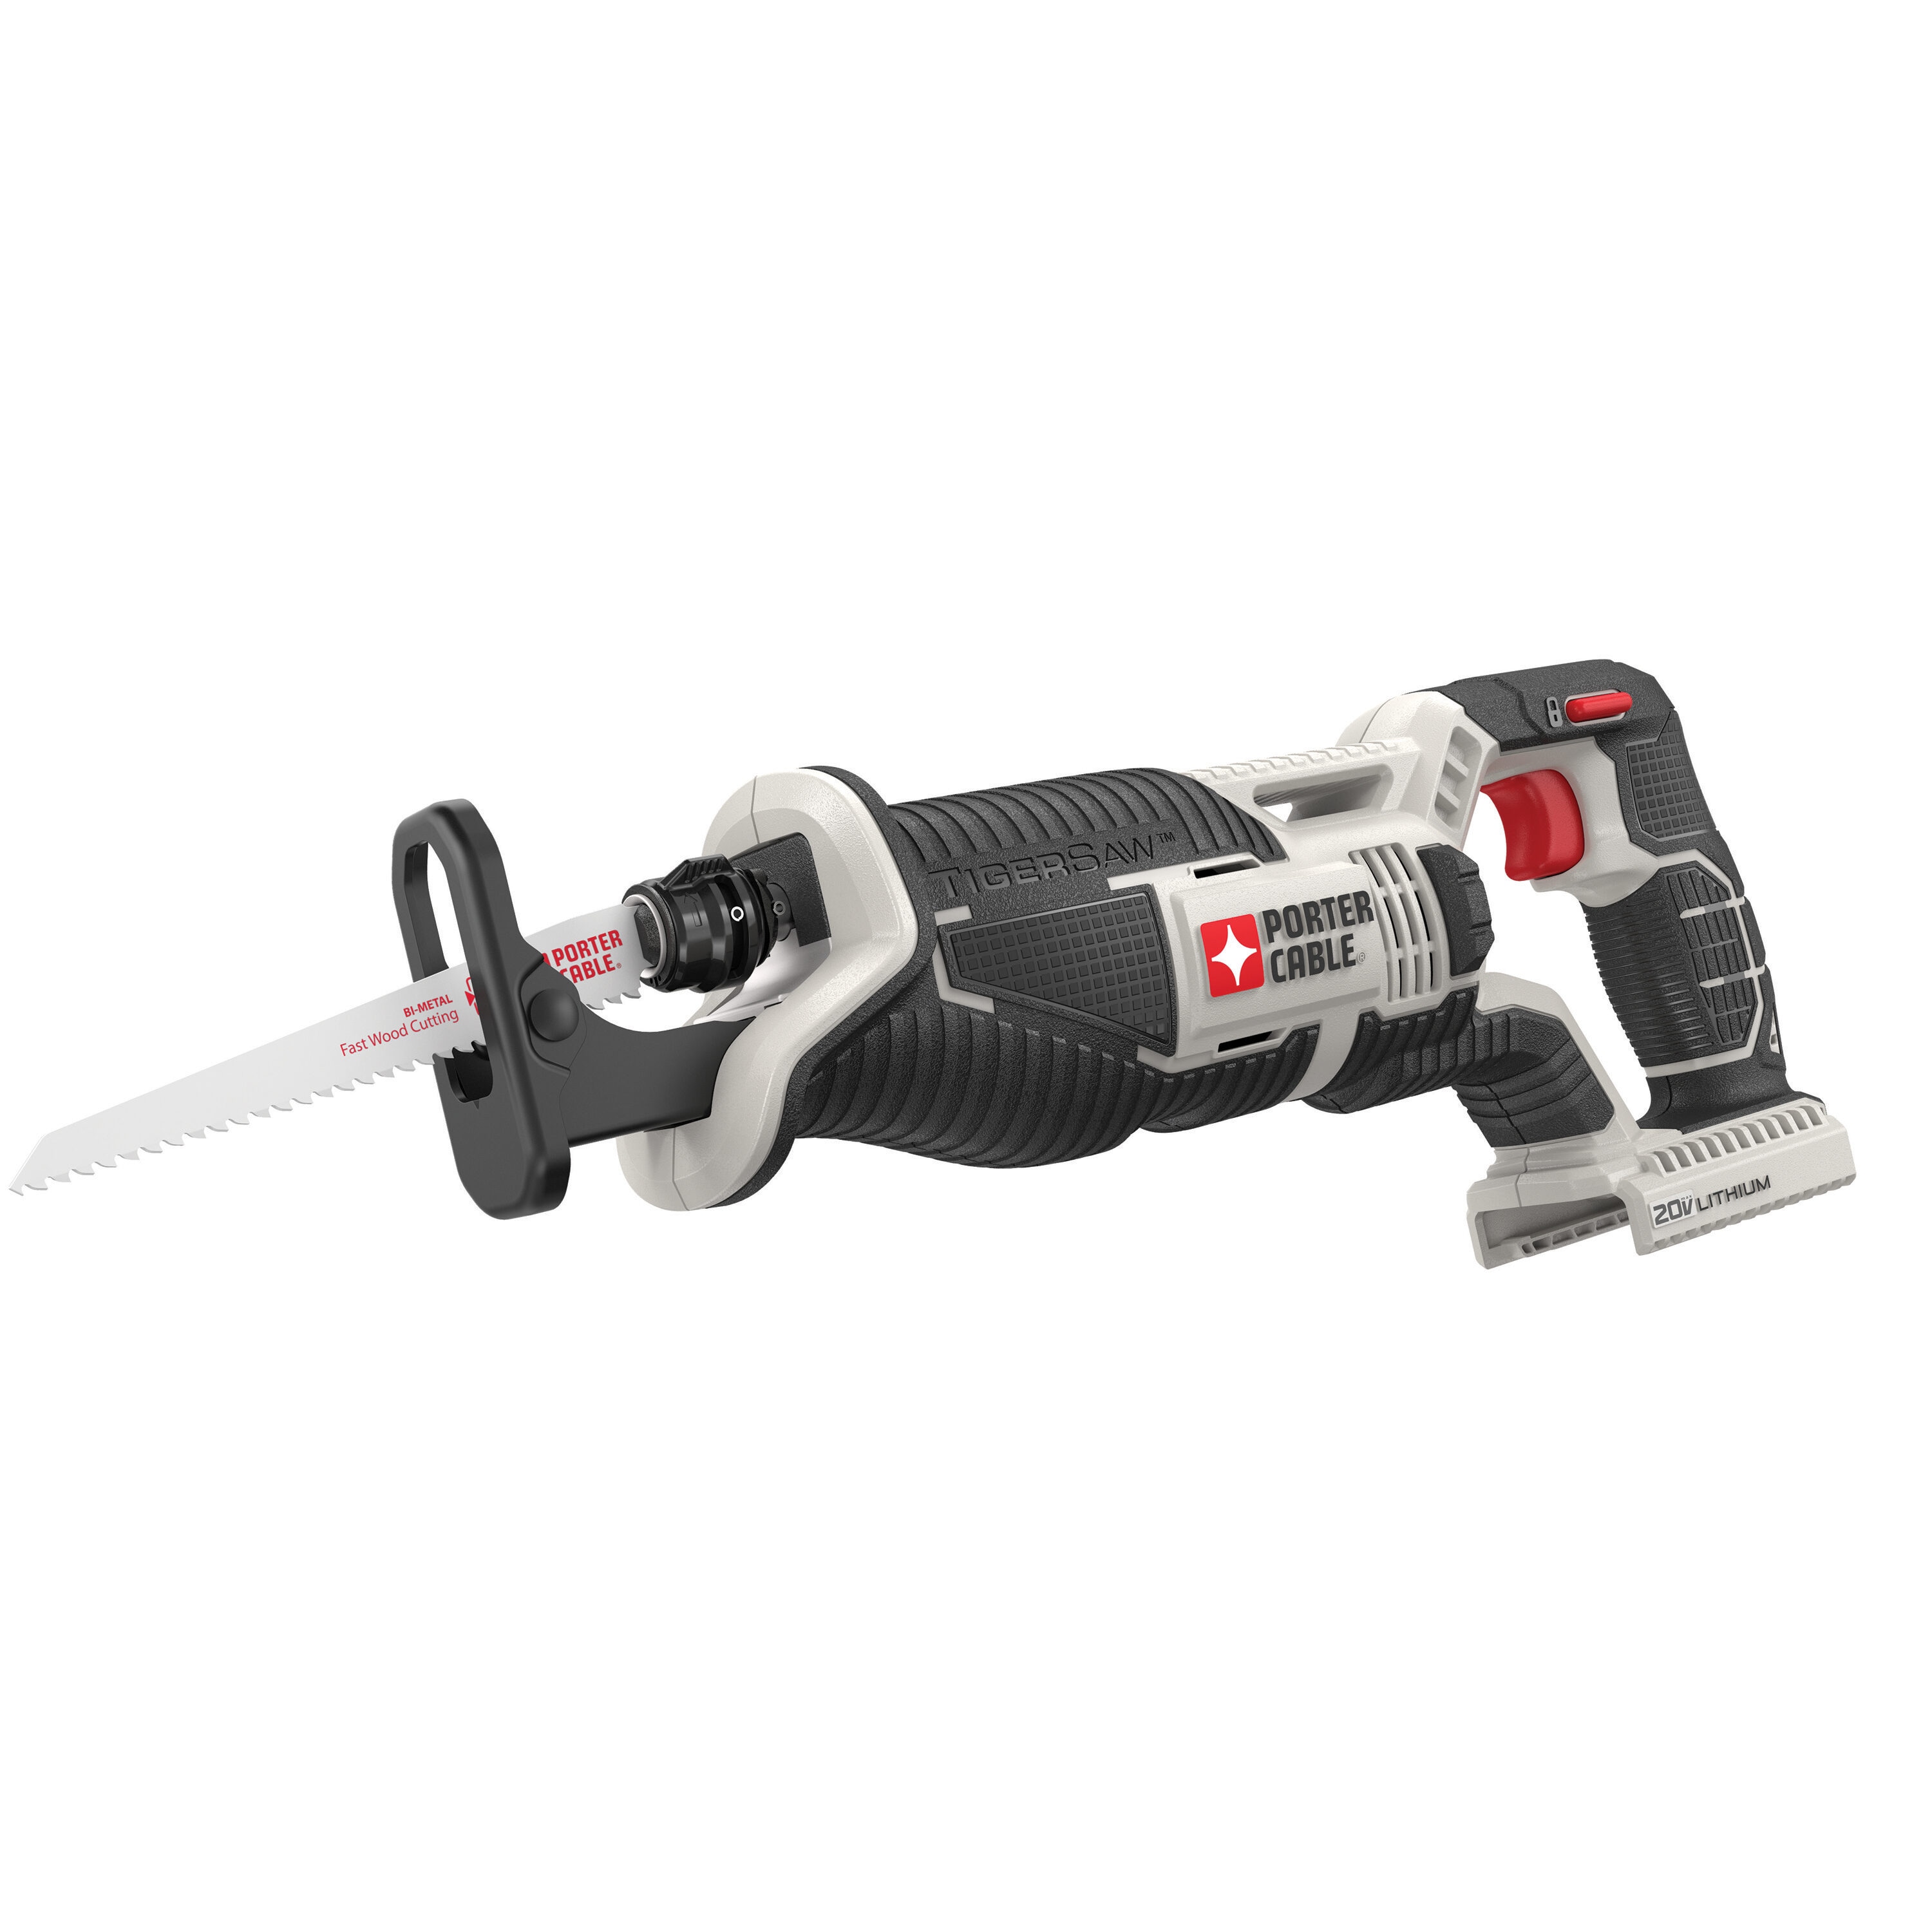 BLACK & DECKER 6-Volt Cordless Reciprocating Saw in the